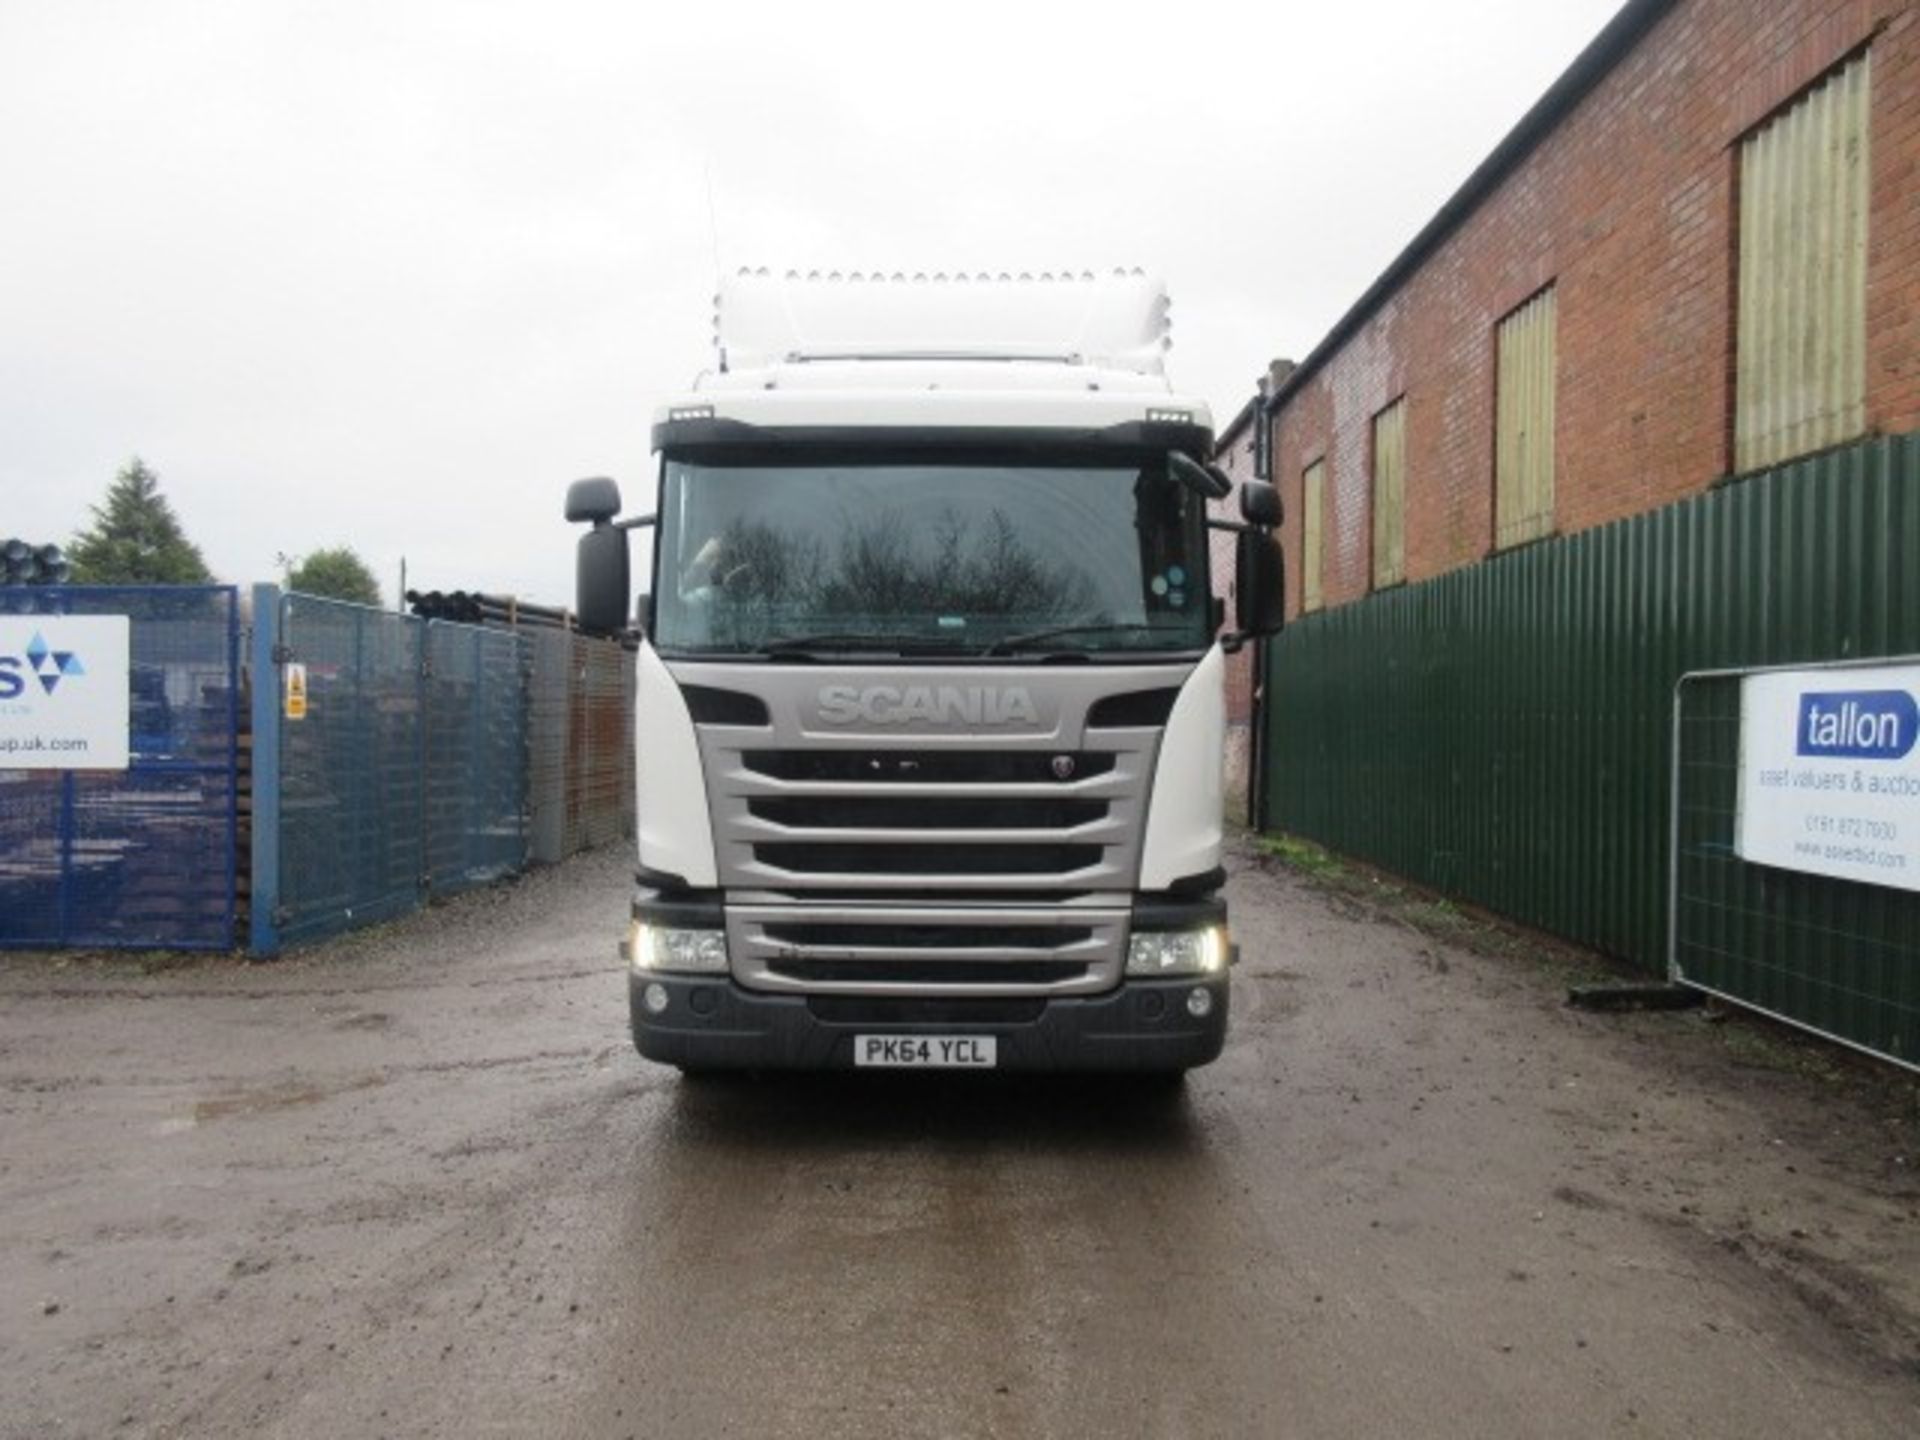 Scania G410 LA6x2/2MNA tractor unit, 2014, '64' PK64 YCL - LOCATED IN WIGAN - Image 3 of 10